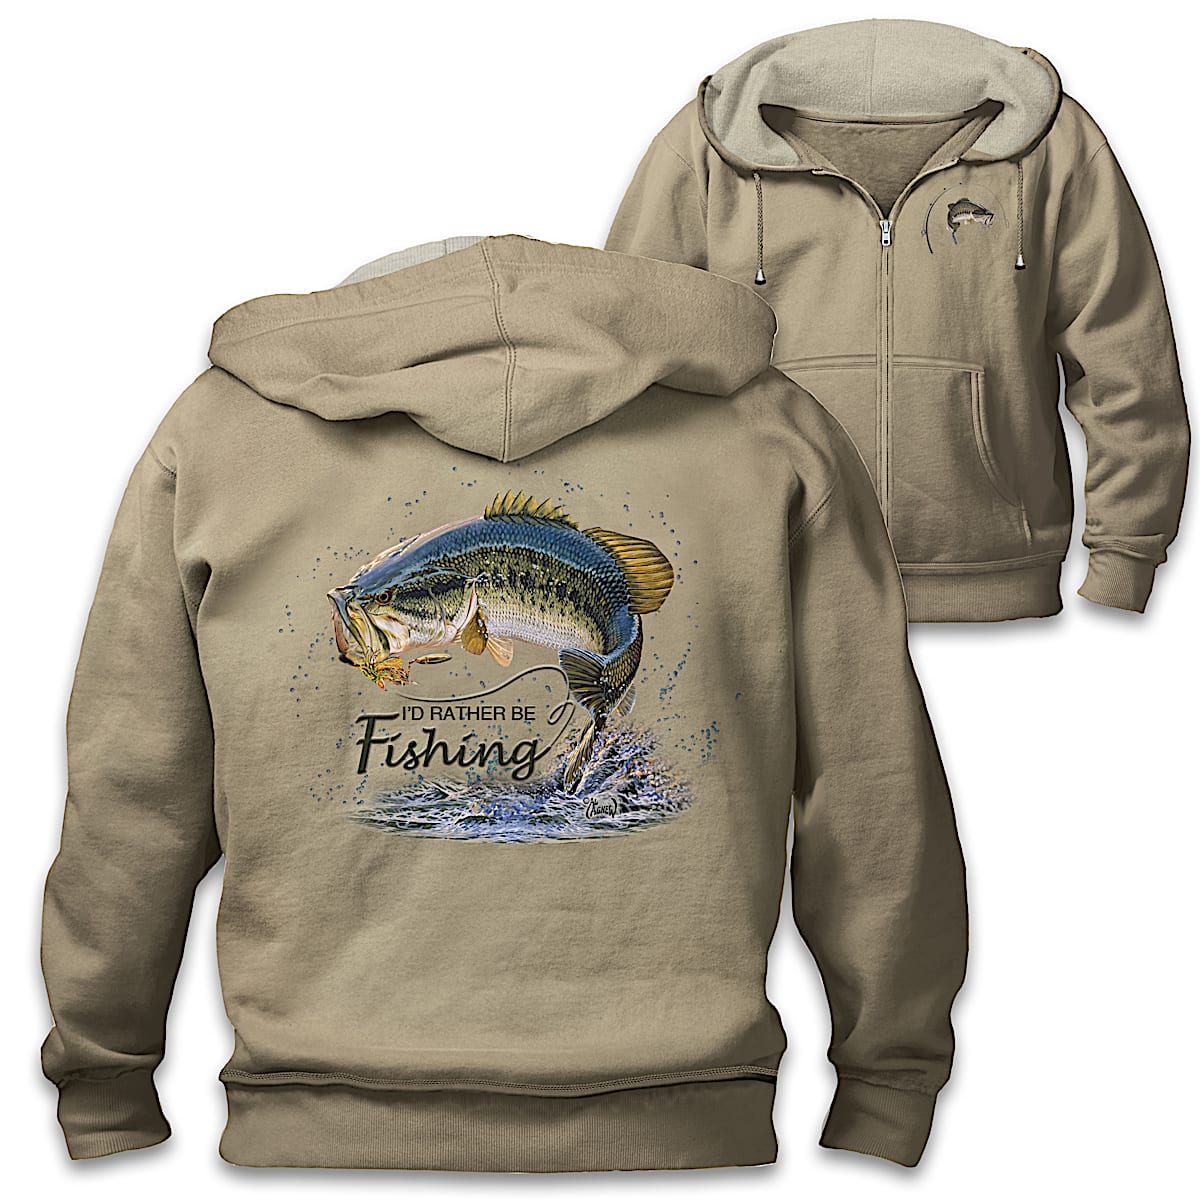 Fish On! Mens Full-Zip Hoodie Featuring Fishing Art By Artist Al Agnew With  An Avid Anglers Favourite Sentiment Id Rather Be Fishing On The Back